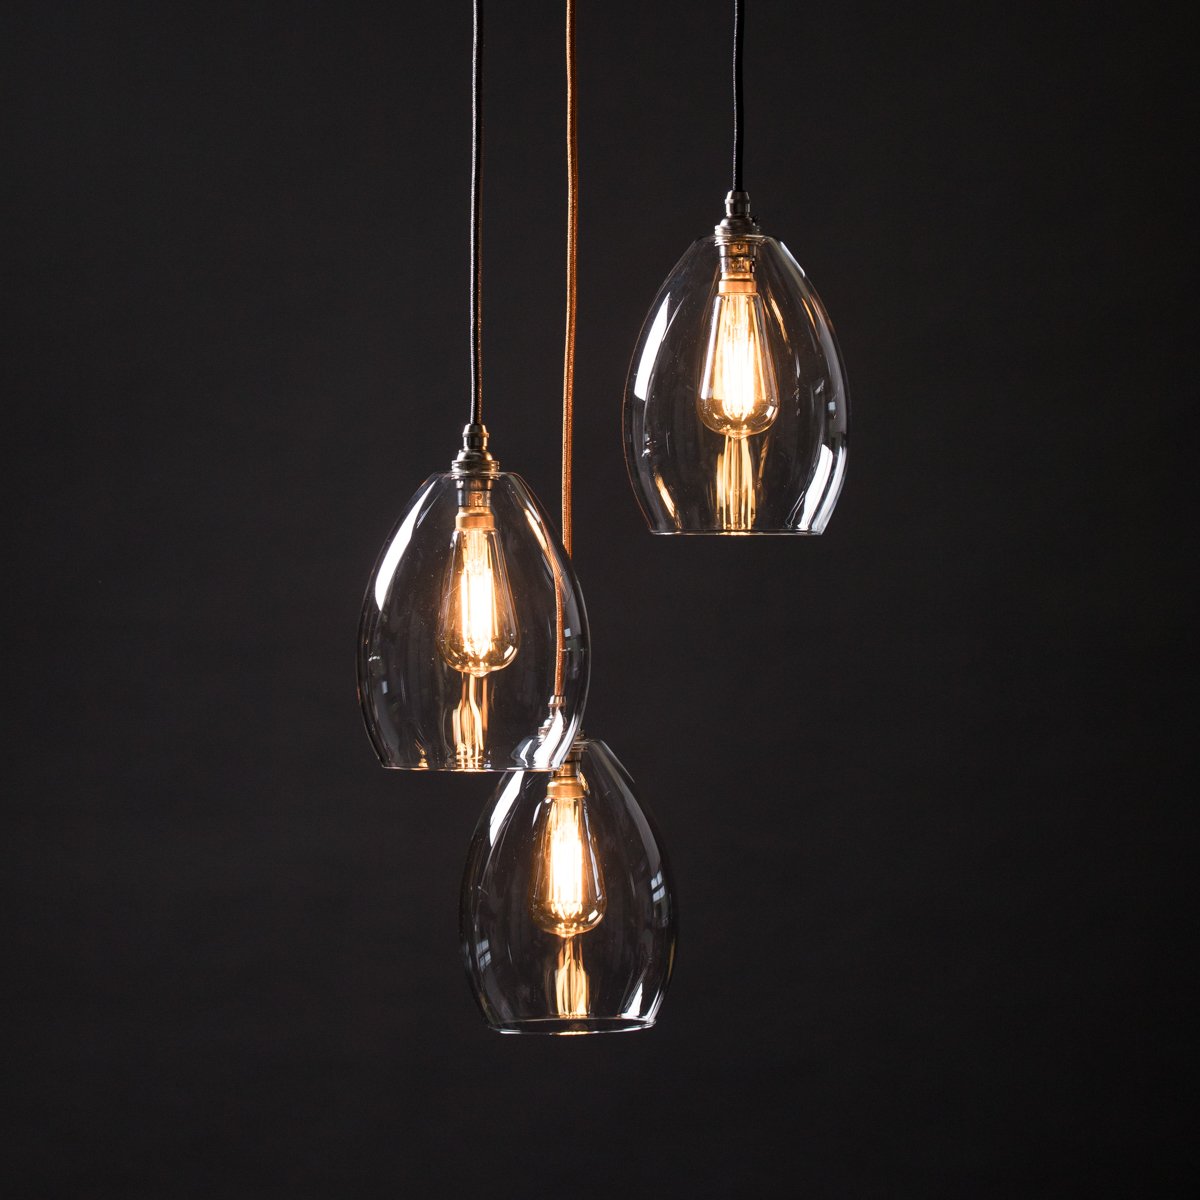 Jules Mid 3 Way Larger Plate Cluster Pendant Light